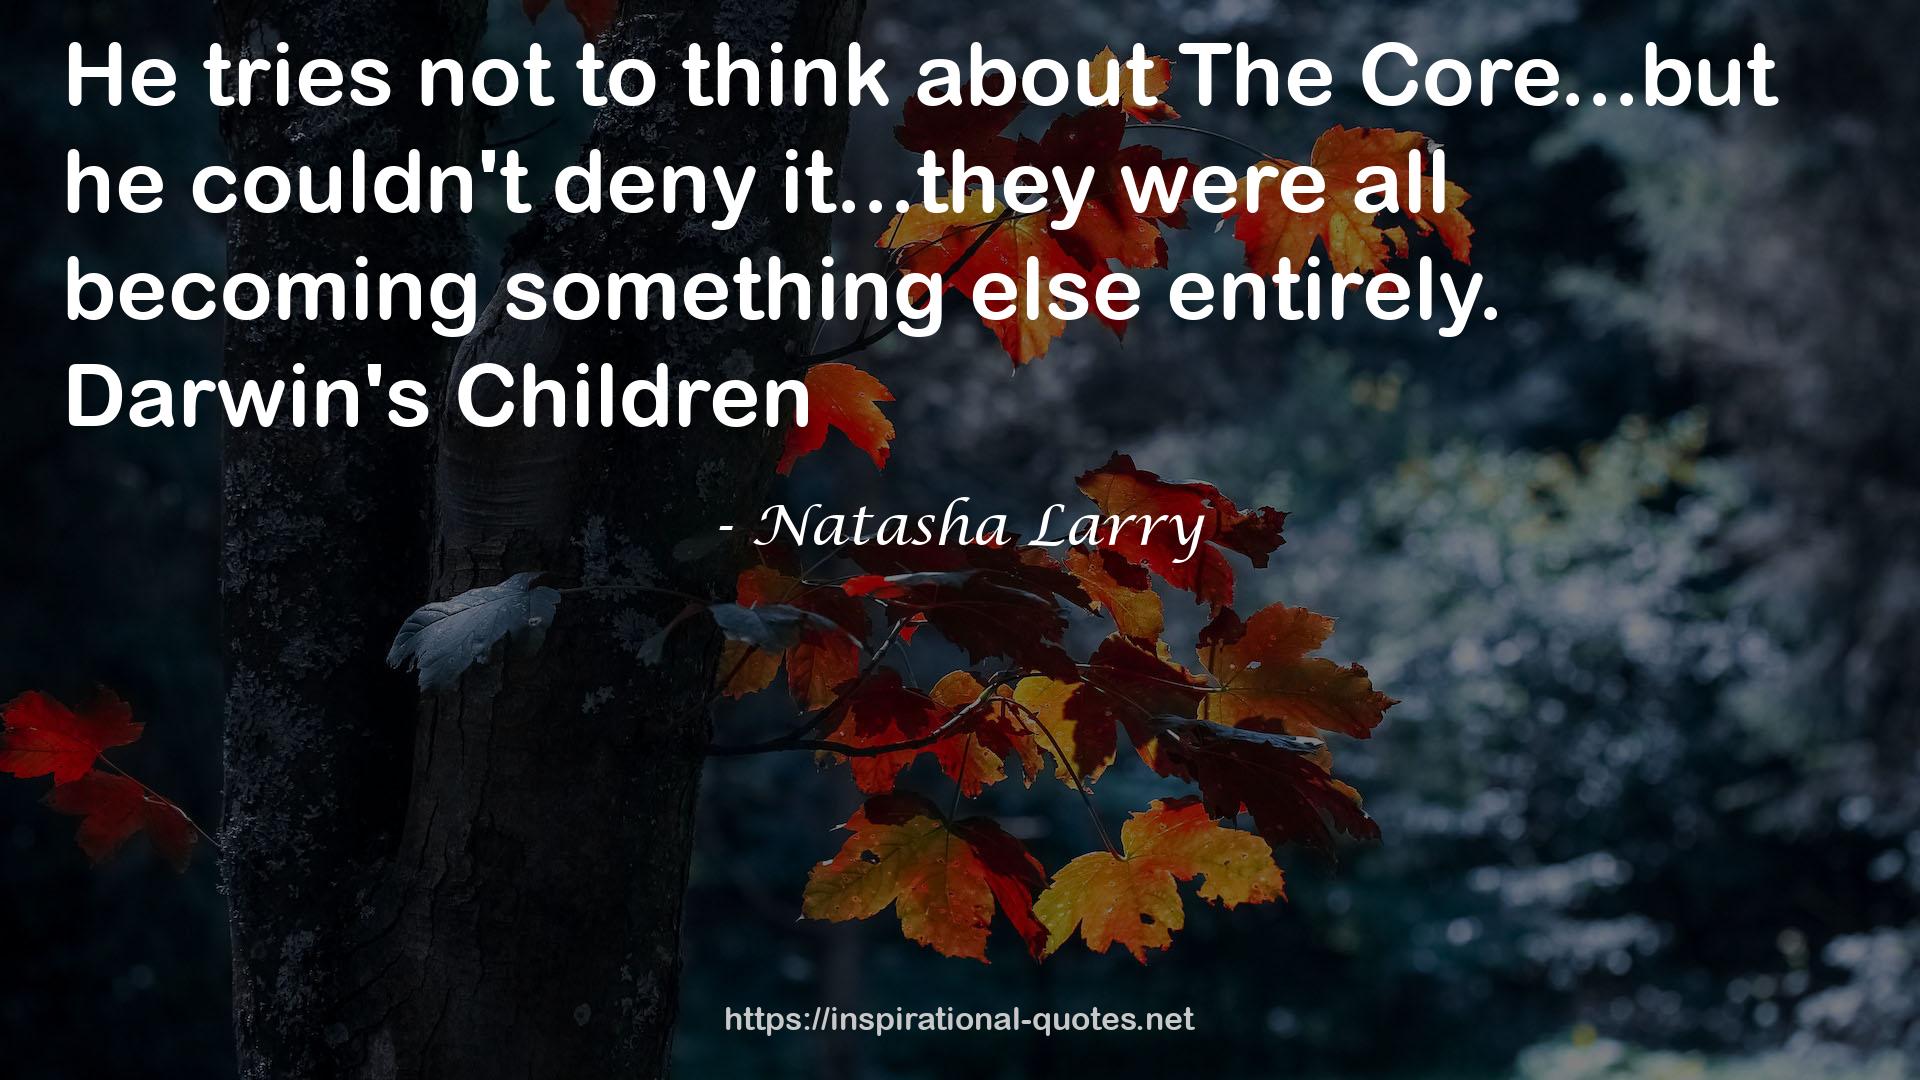 Natasha Larry quote : He tries not to think about The Core...but he couldn't deny it...they were all becoming something else entirely. Darwin's Children